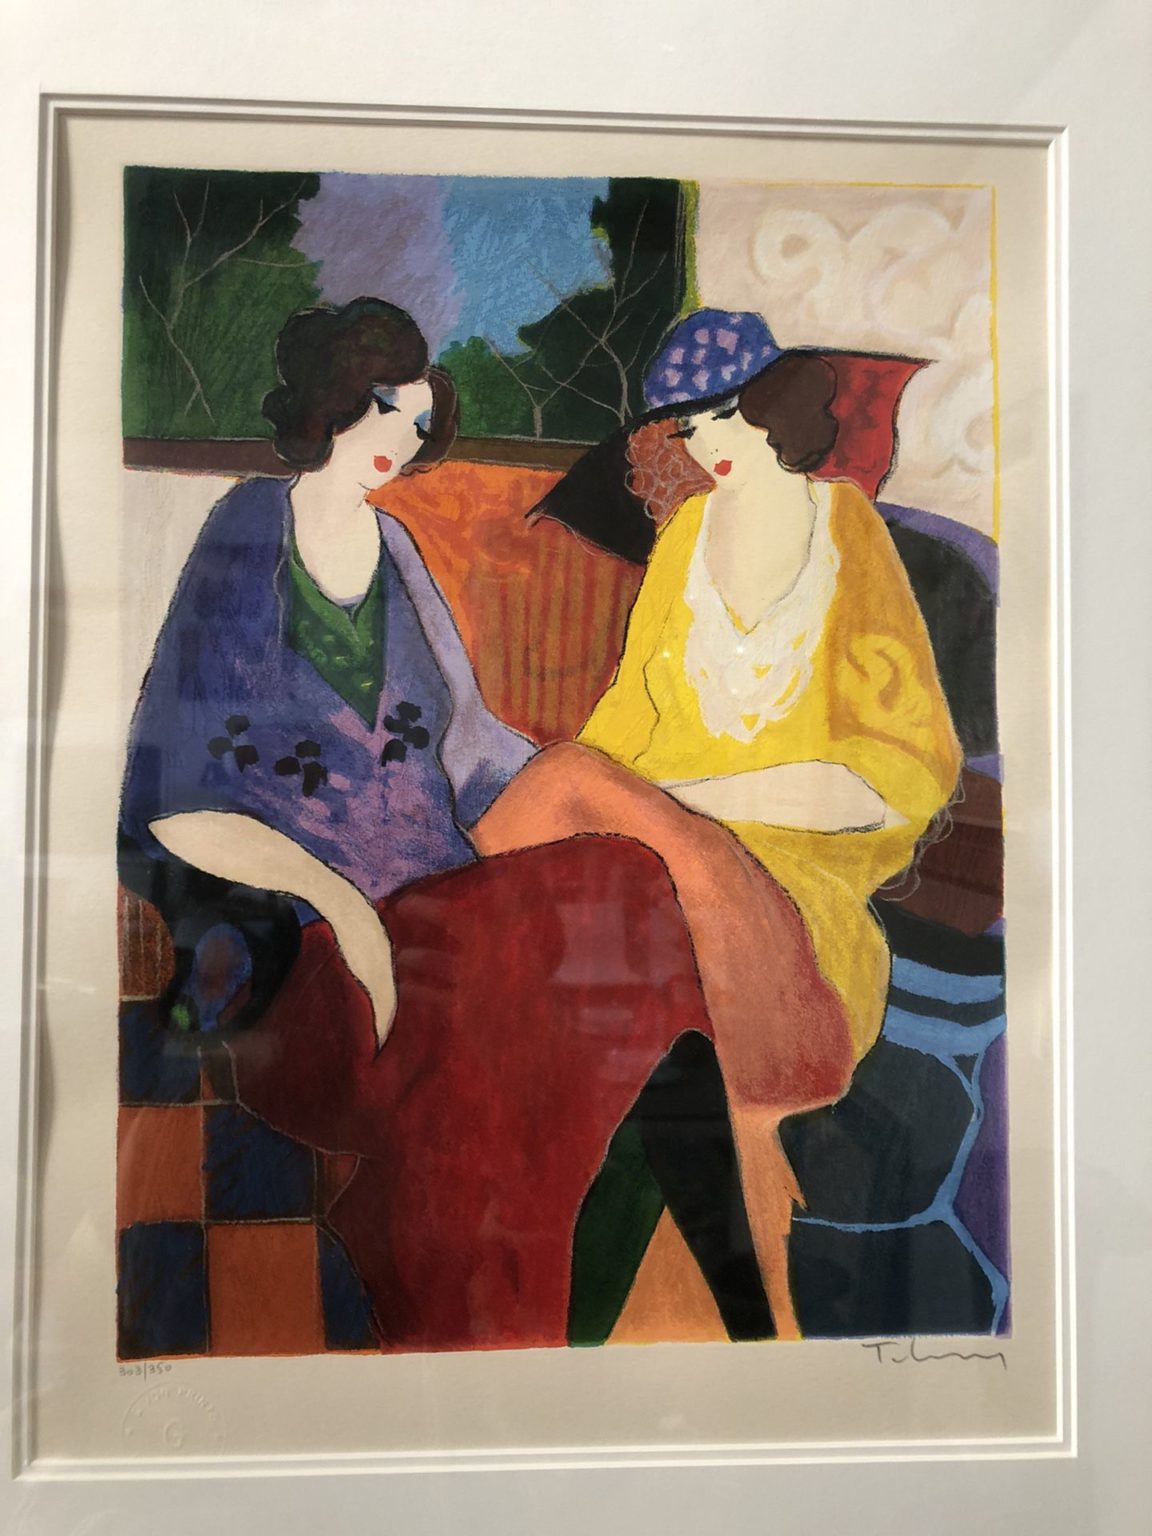 “Nicole And Chloe” by Itzchale Tarkay – Design Consignment